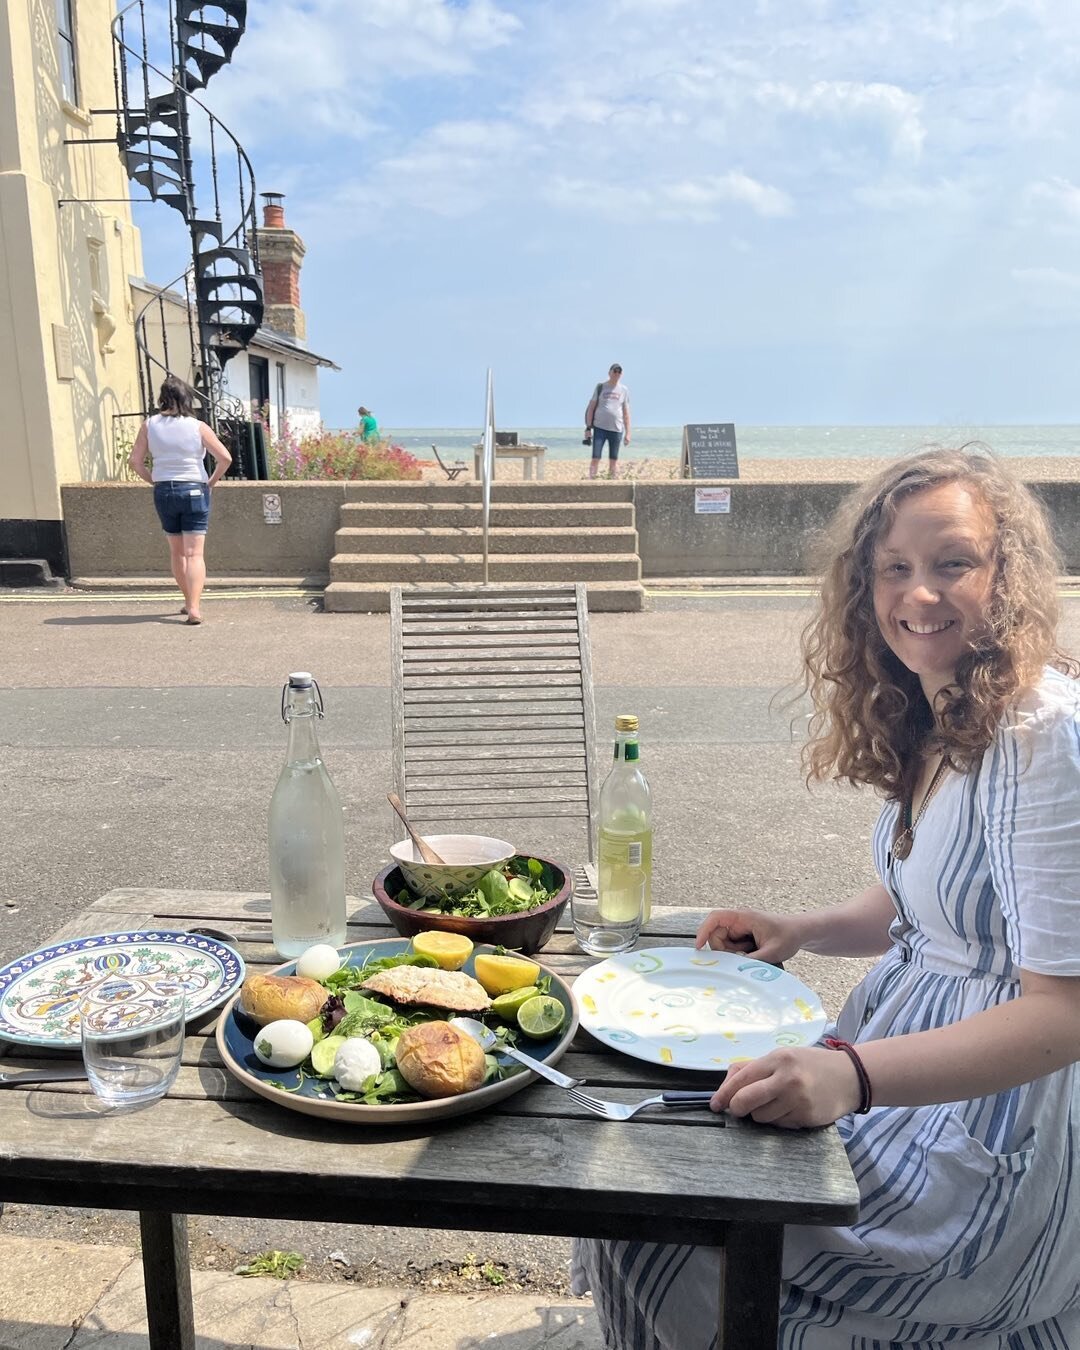 You are cordially invited to join Perienne Christian for her Lookout Cookout recipe tasting tomorrow bank holiday Monday 8th May 12 - 2pm at the Aldeburgh Beach Lookout. All welcome!